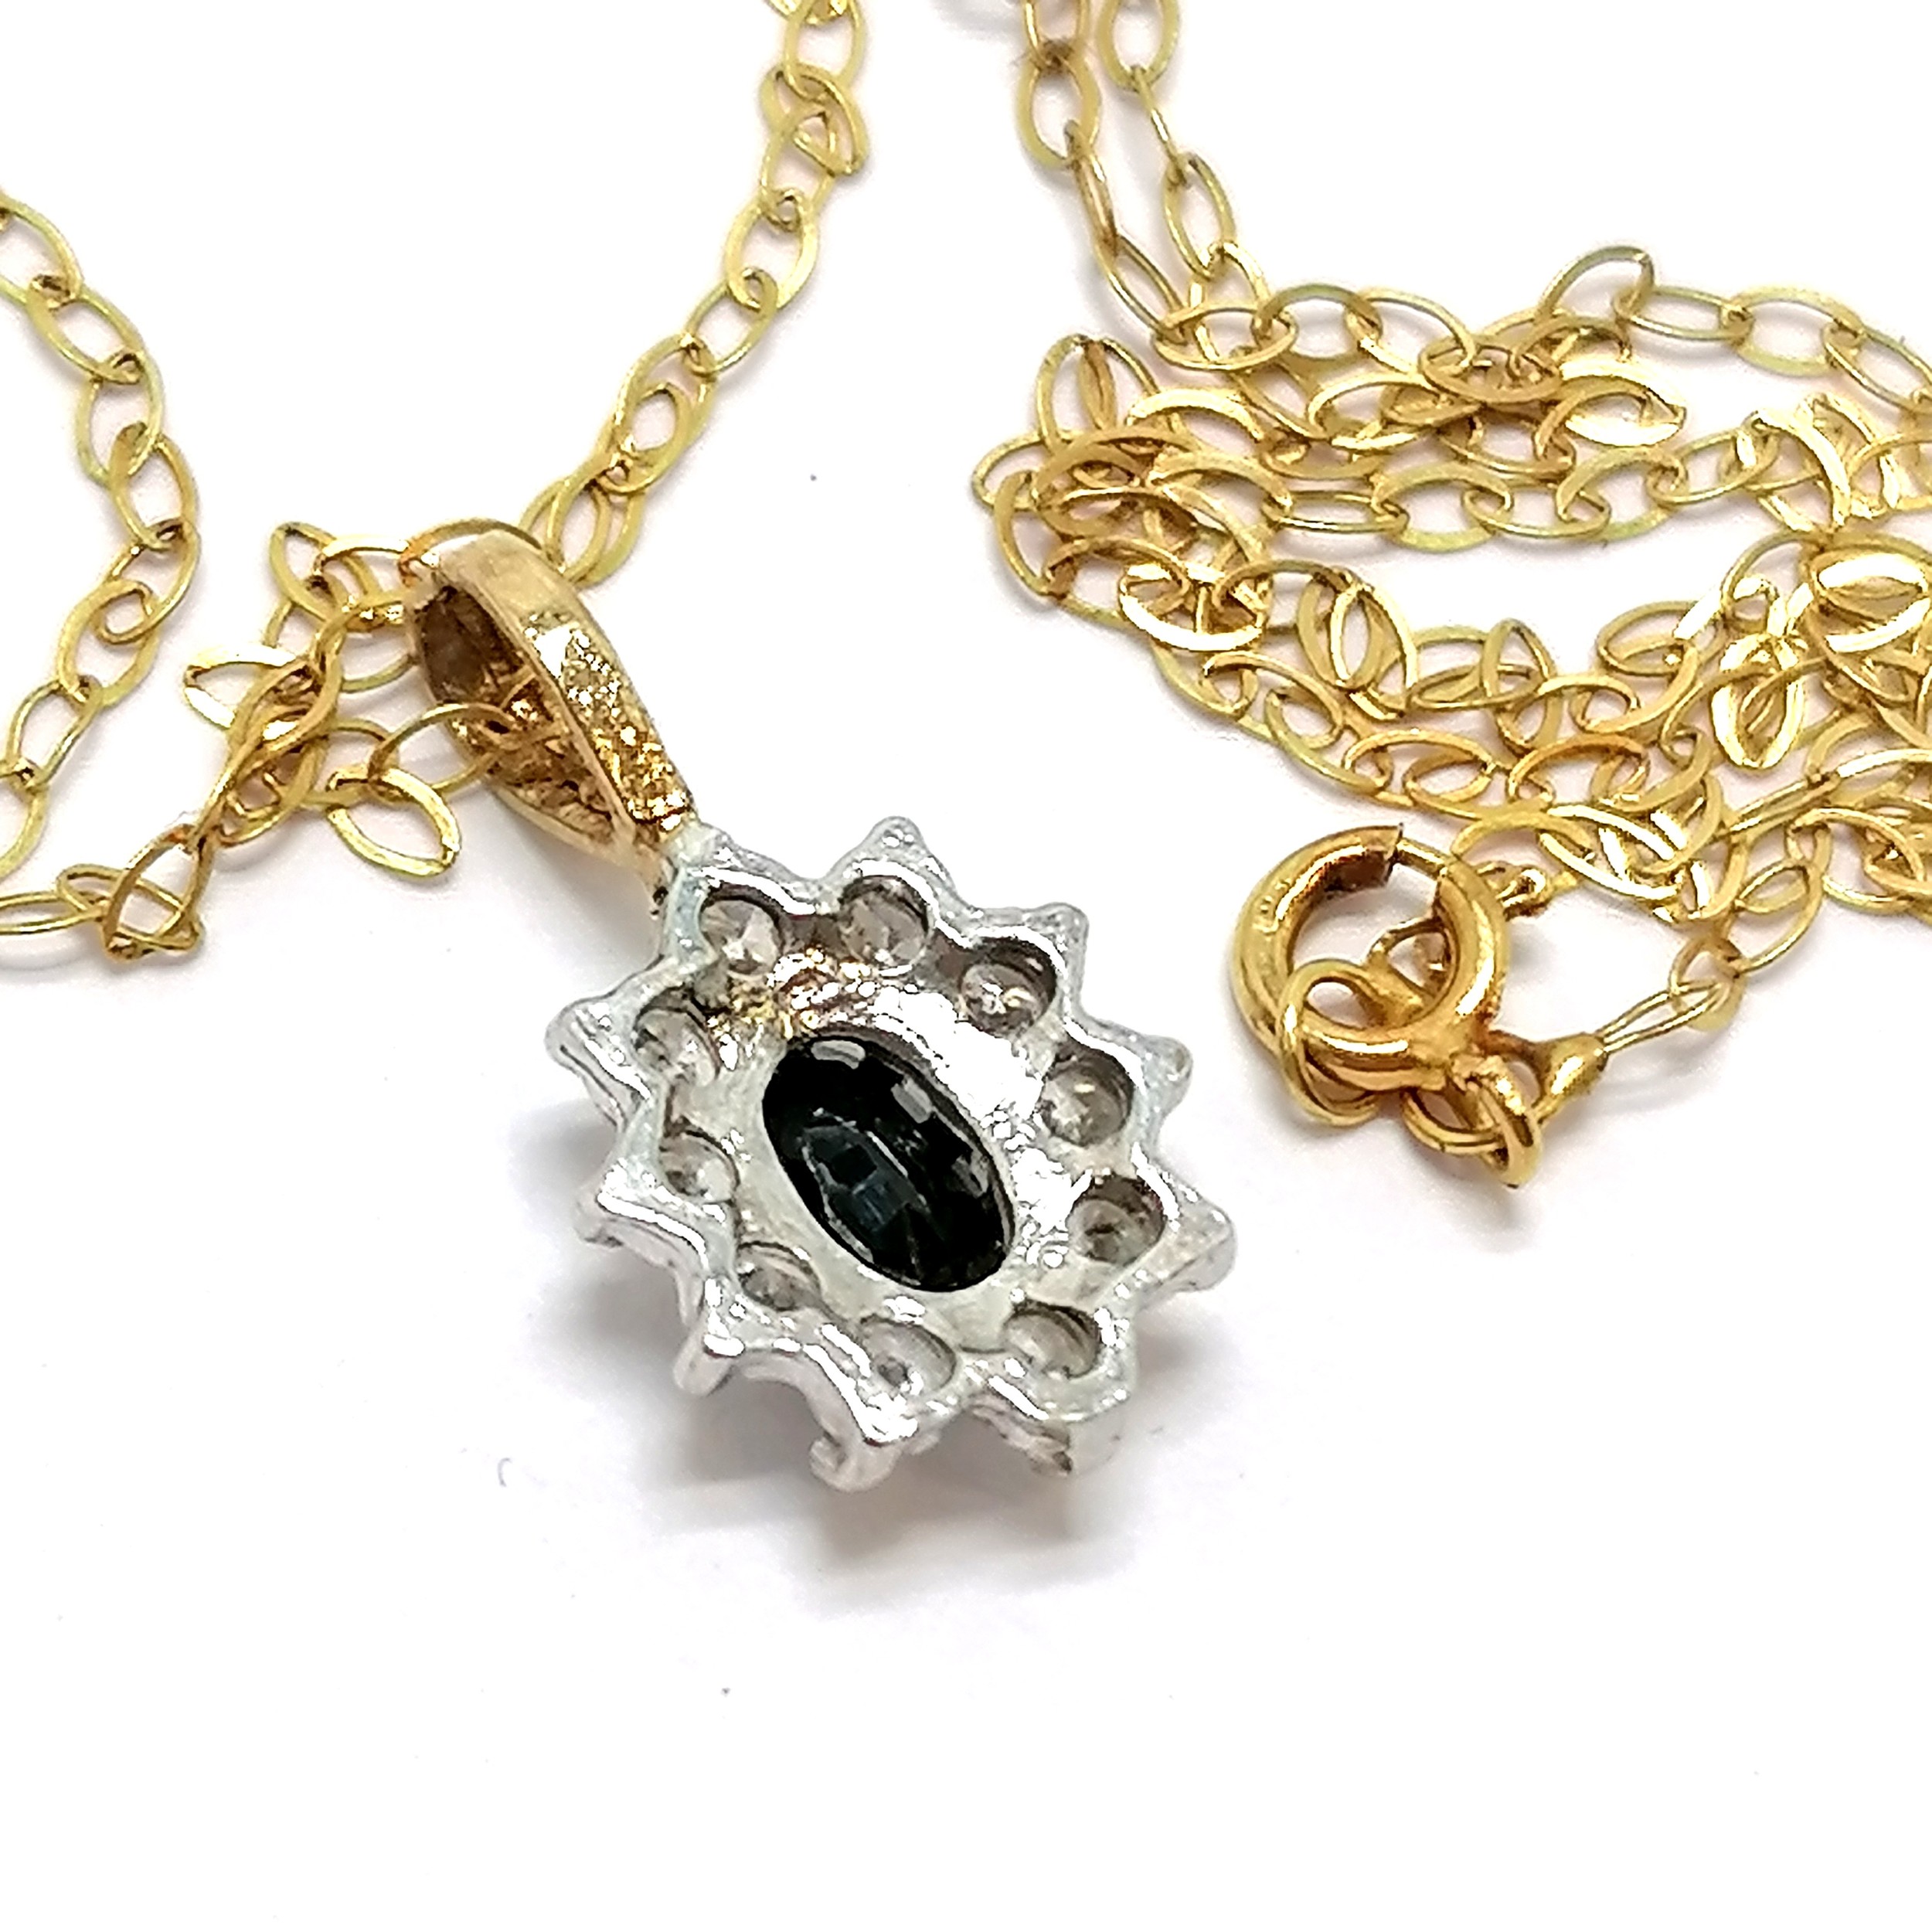 Unmarked gold sapphire & white stone pendant on a fine 9ct marked gold 40cm chain - total weight 1g - Image 2 of 3